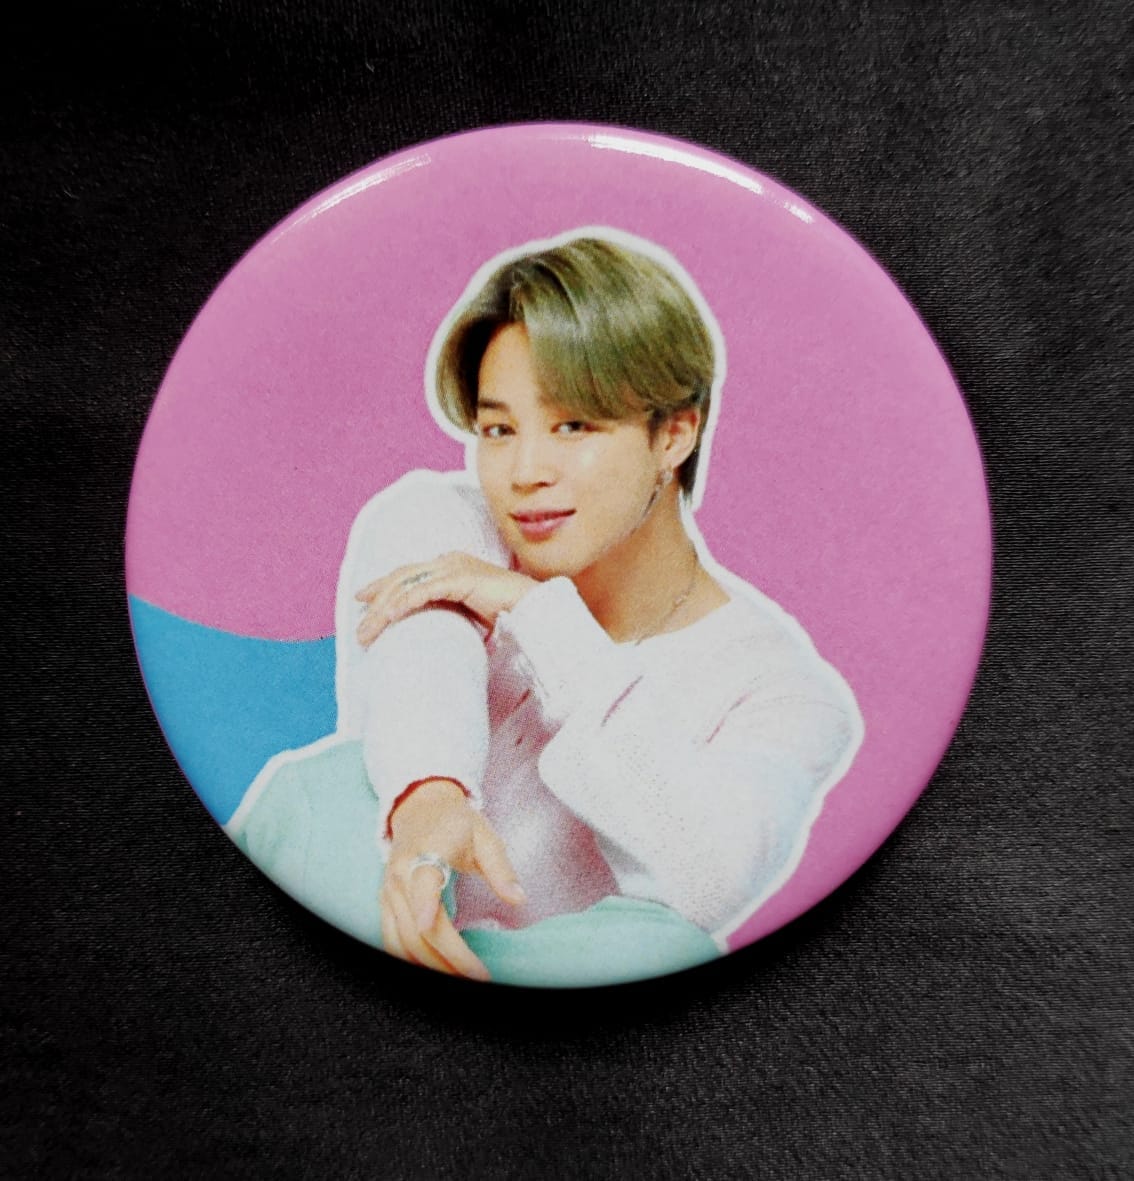 PABOO BTS Button badge for shirts, bags with a back Pin BTS Boy Band PinBack Button Badge Toys for Boys Girls Men & Women, Pure Virgin Plastic for T Shirts, School Bags, Backpacks, Cap, Clothes, Hoodie, Gifts Accessories, BTSPBV2